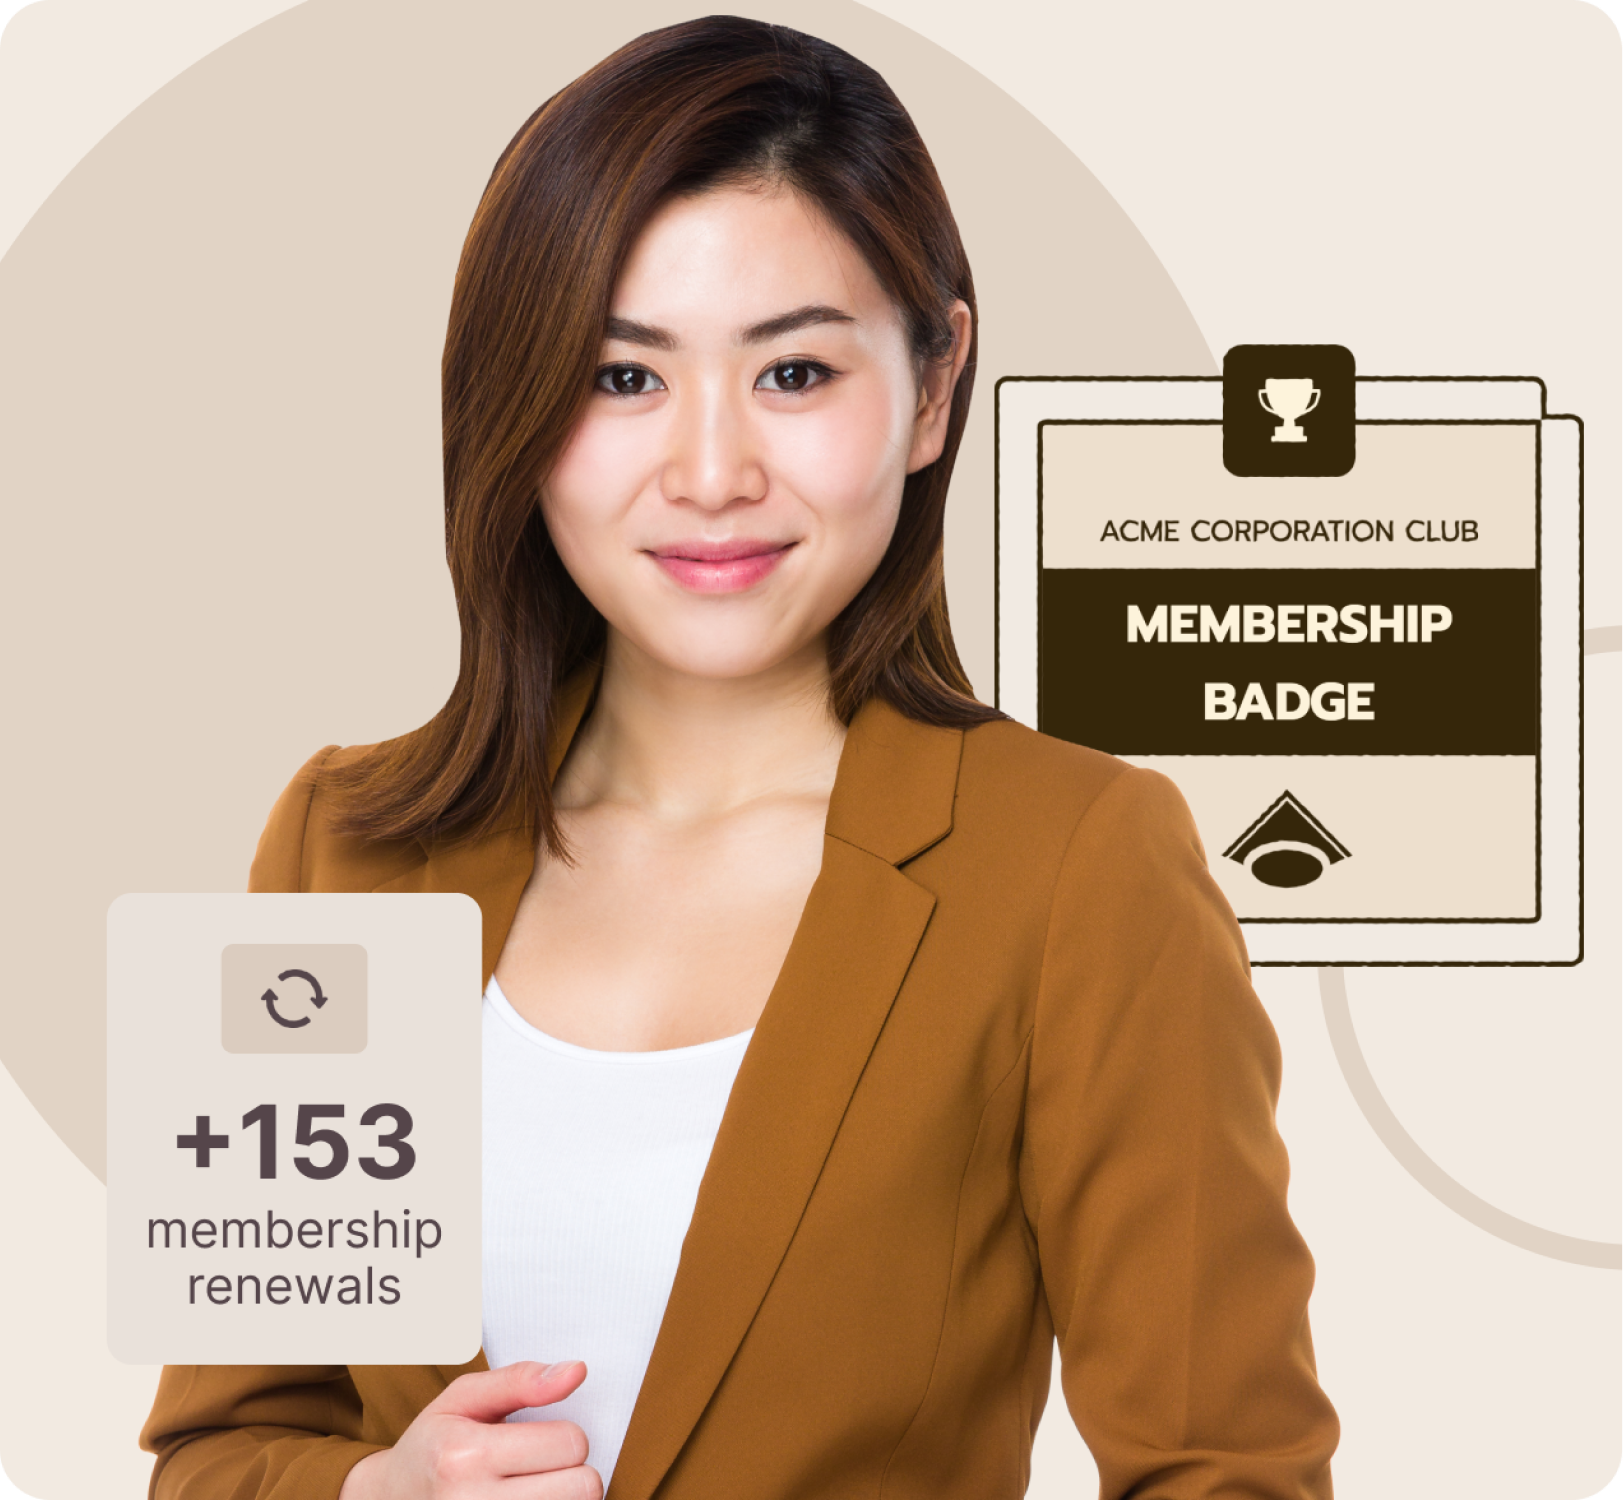 Boost renewals with digital badges